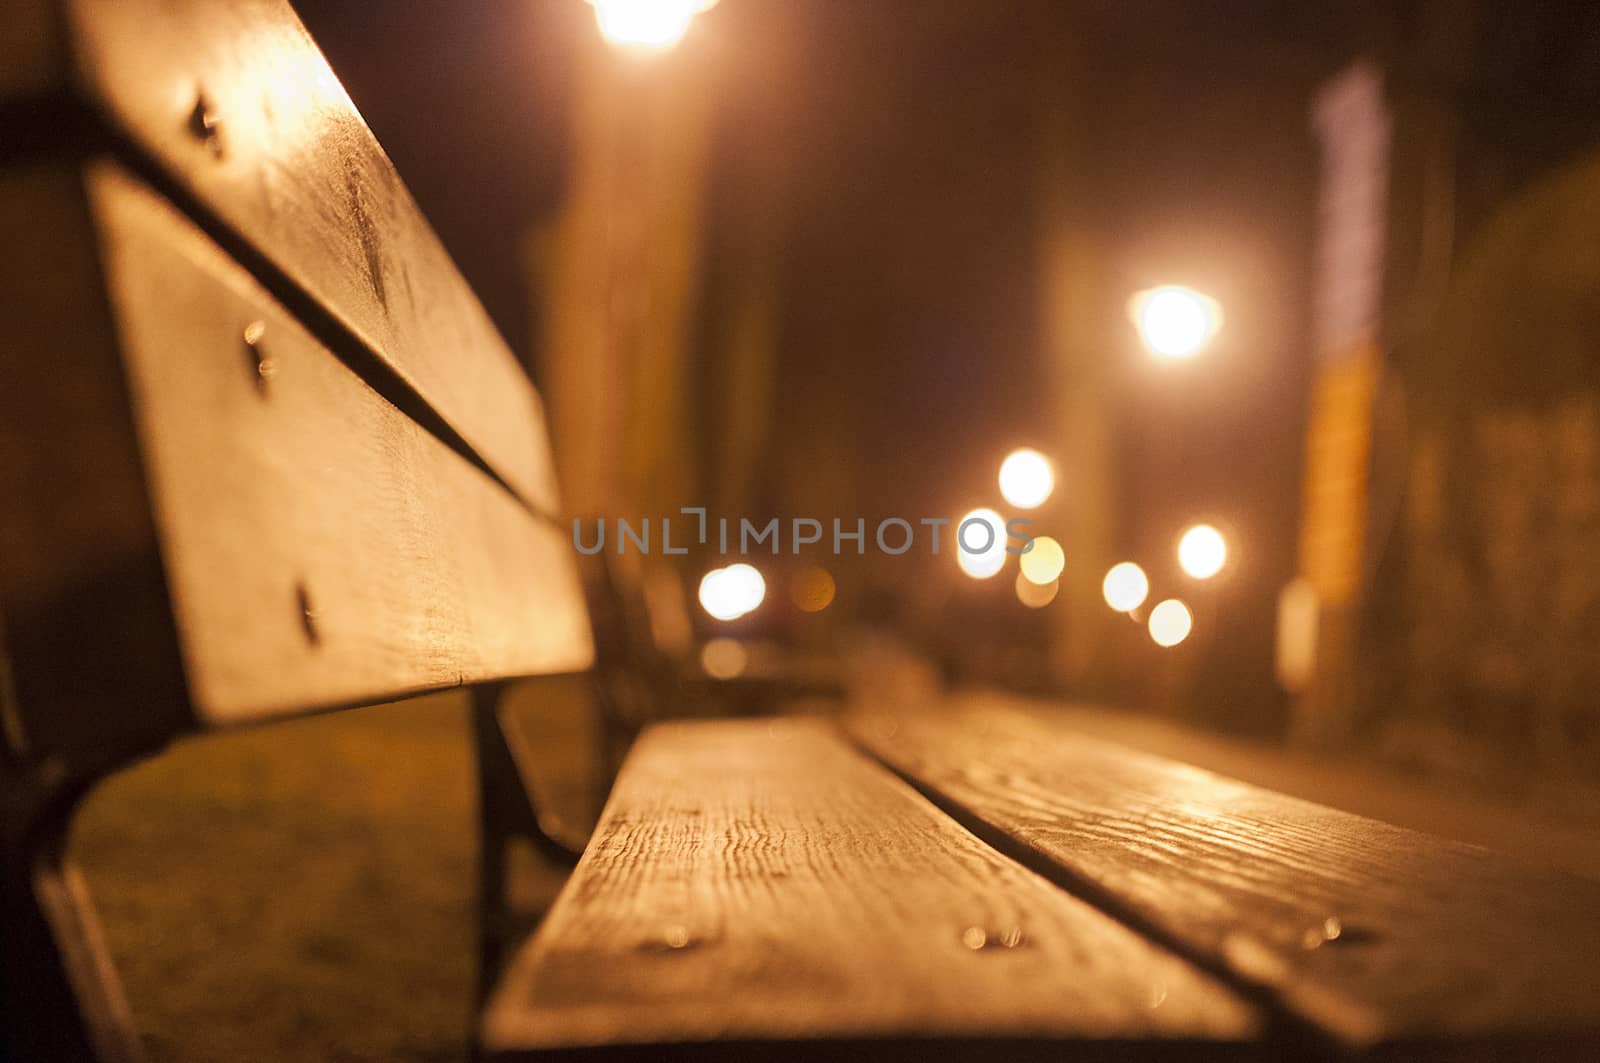 A bench in the park by remusrigo